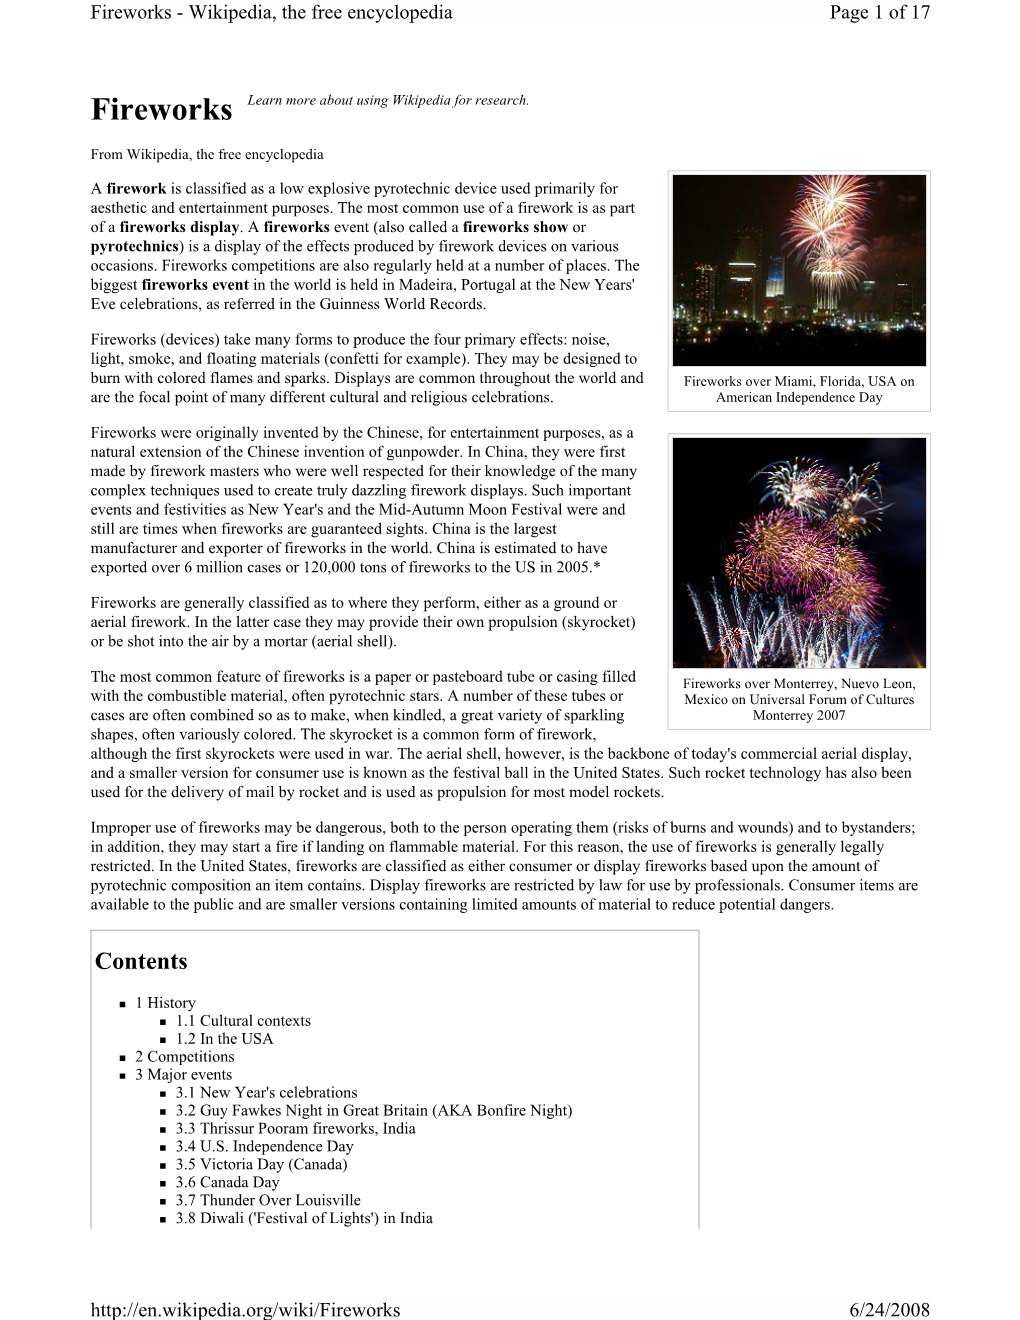 Fireworks - Wikipedia, the Free Encyclopedia Page 1 of 17